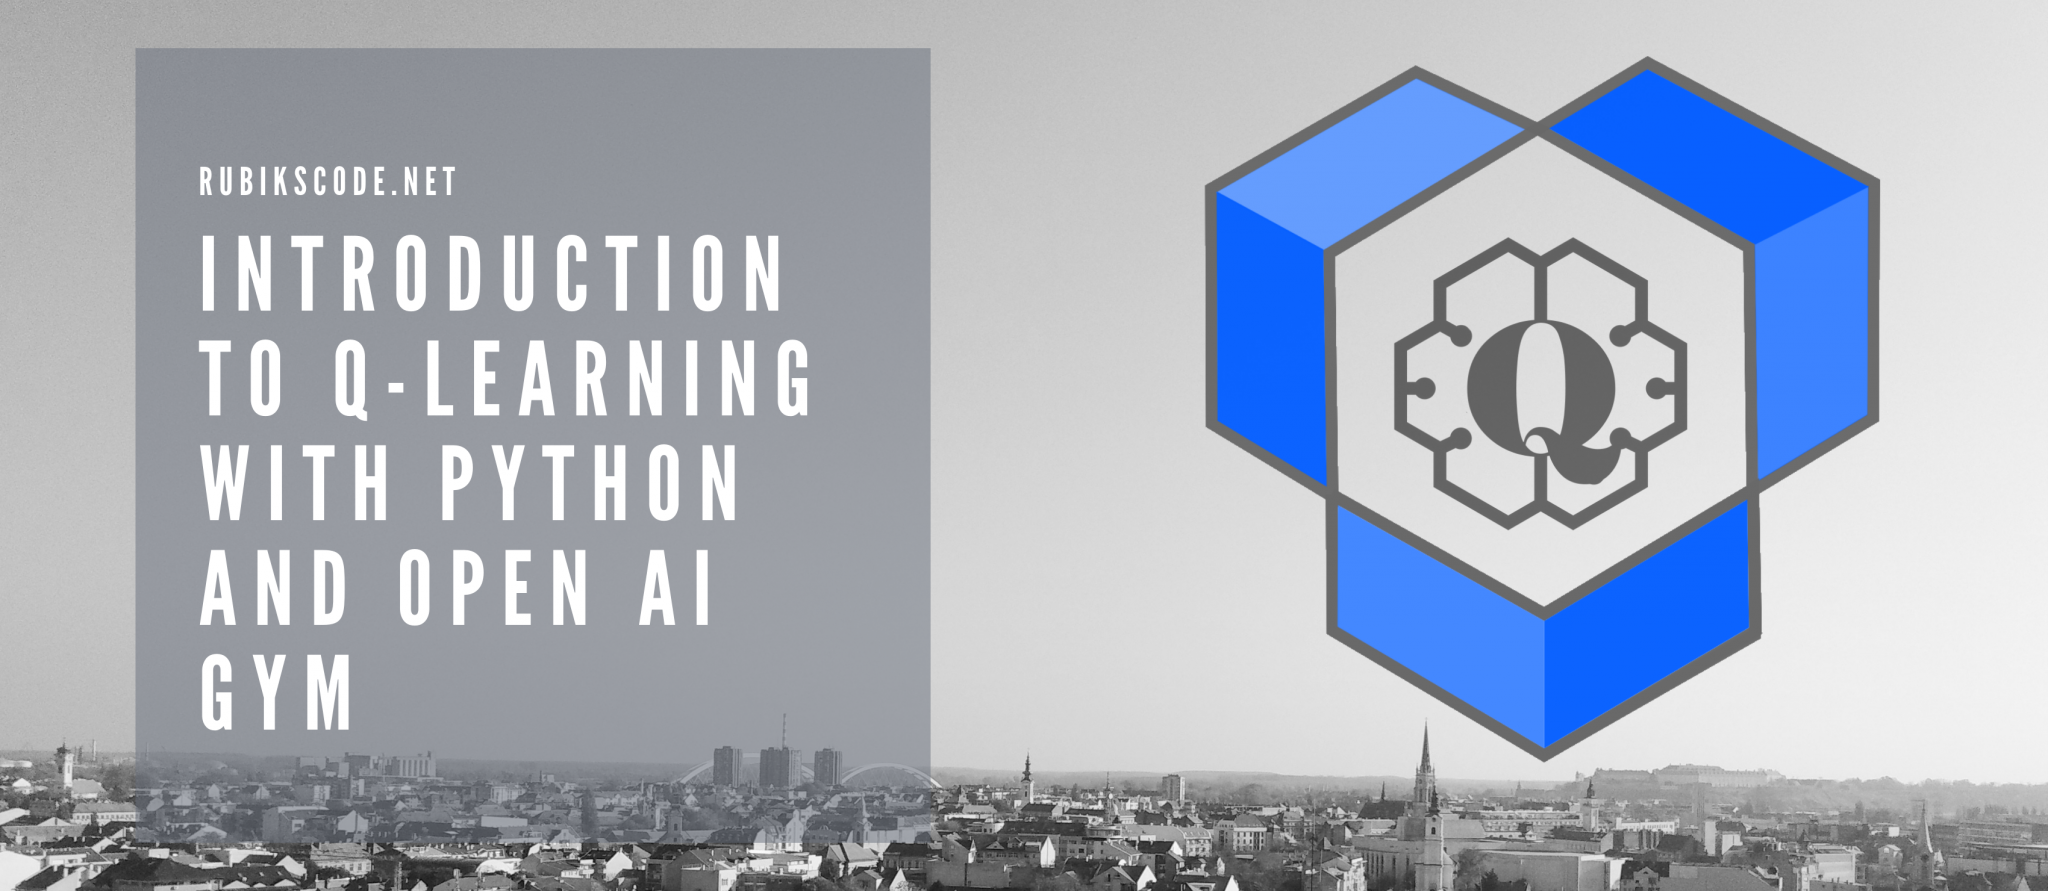 Introduction to Q-Learning with Python and Open AI Gym